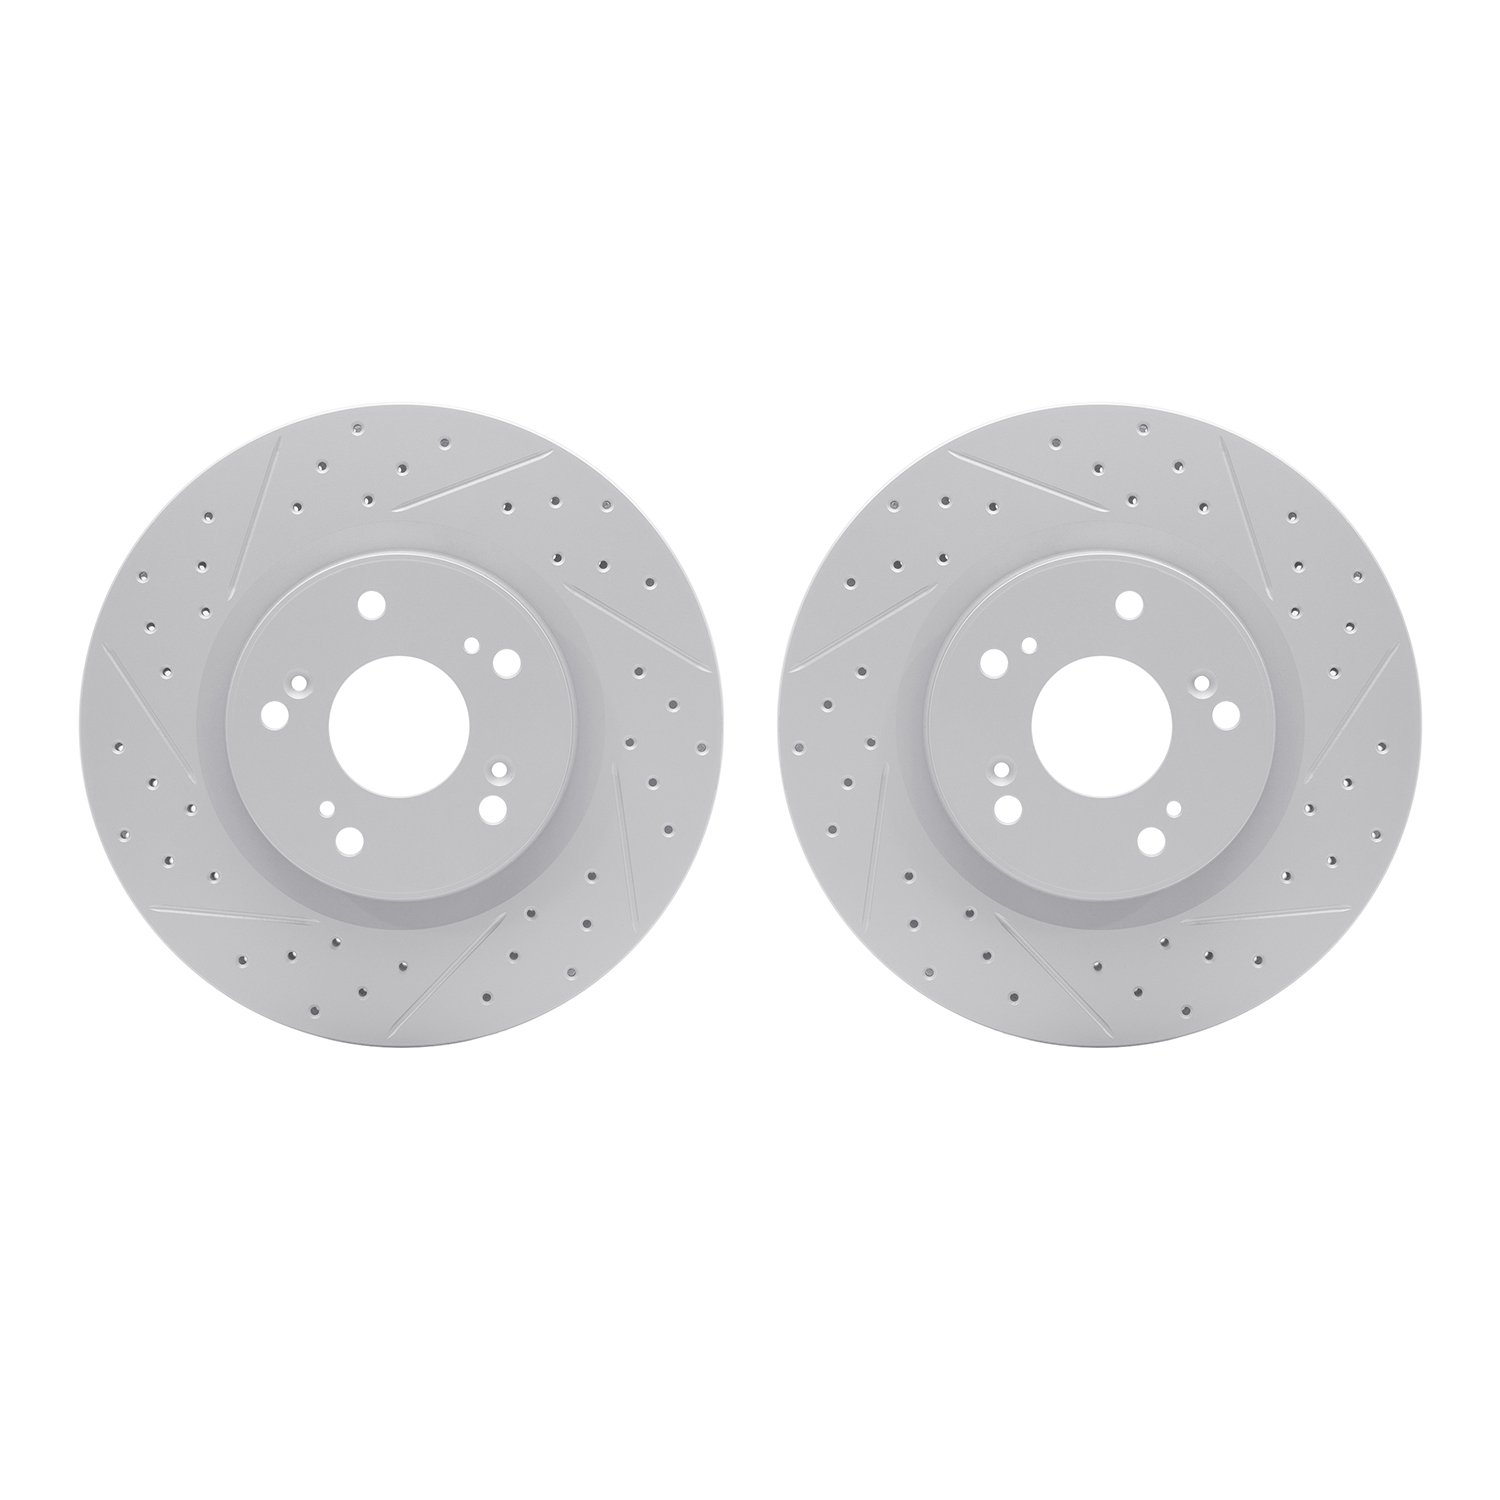 2002-59025 Geoperformance Drilled/Slotted Brake Rotors, 2012-2016 Acura/Honda, Position: Front